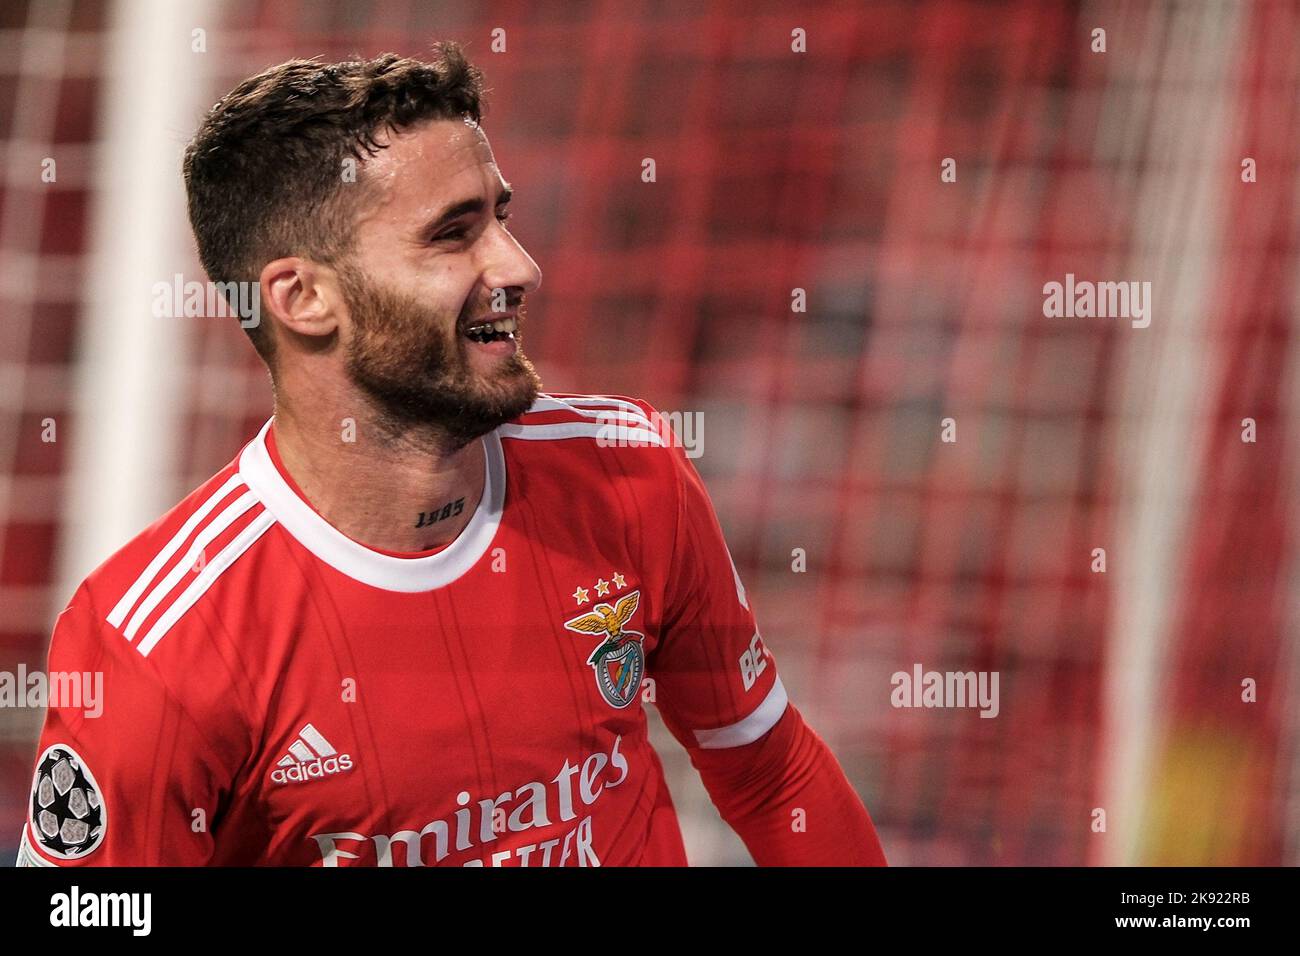 Lisbon, Portugal. 25th Oct, 2022. Rafa Silva of Benfica celebrates after scoring the goal of 3-1 during the Champions League Group H football match between Benfica and Juventus FC at estadio da Luz in Lisbon (Portugal), October 25h, 2022. Photo Federico Tardito/Insidefoto Credit: Insidefoto di andrea staccioli/Alamy Live News Stock Photo